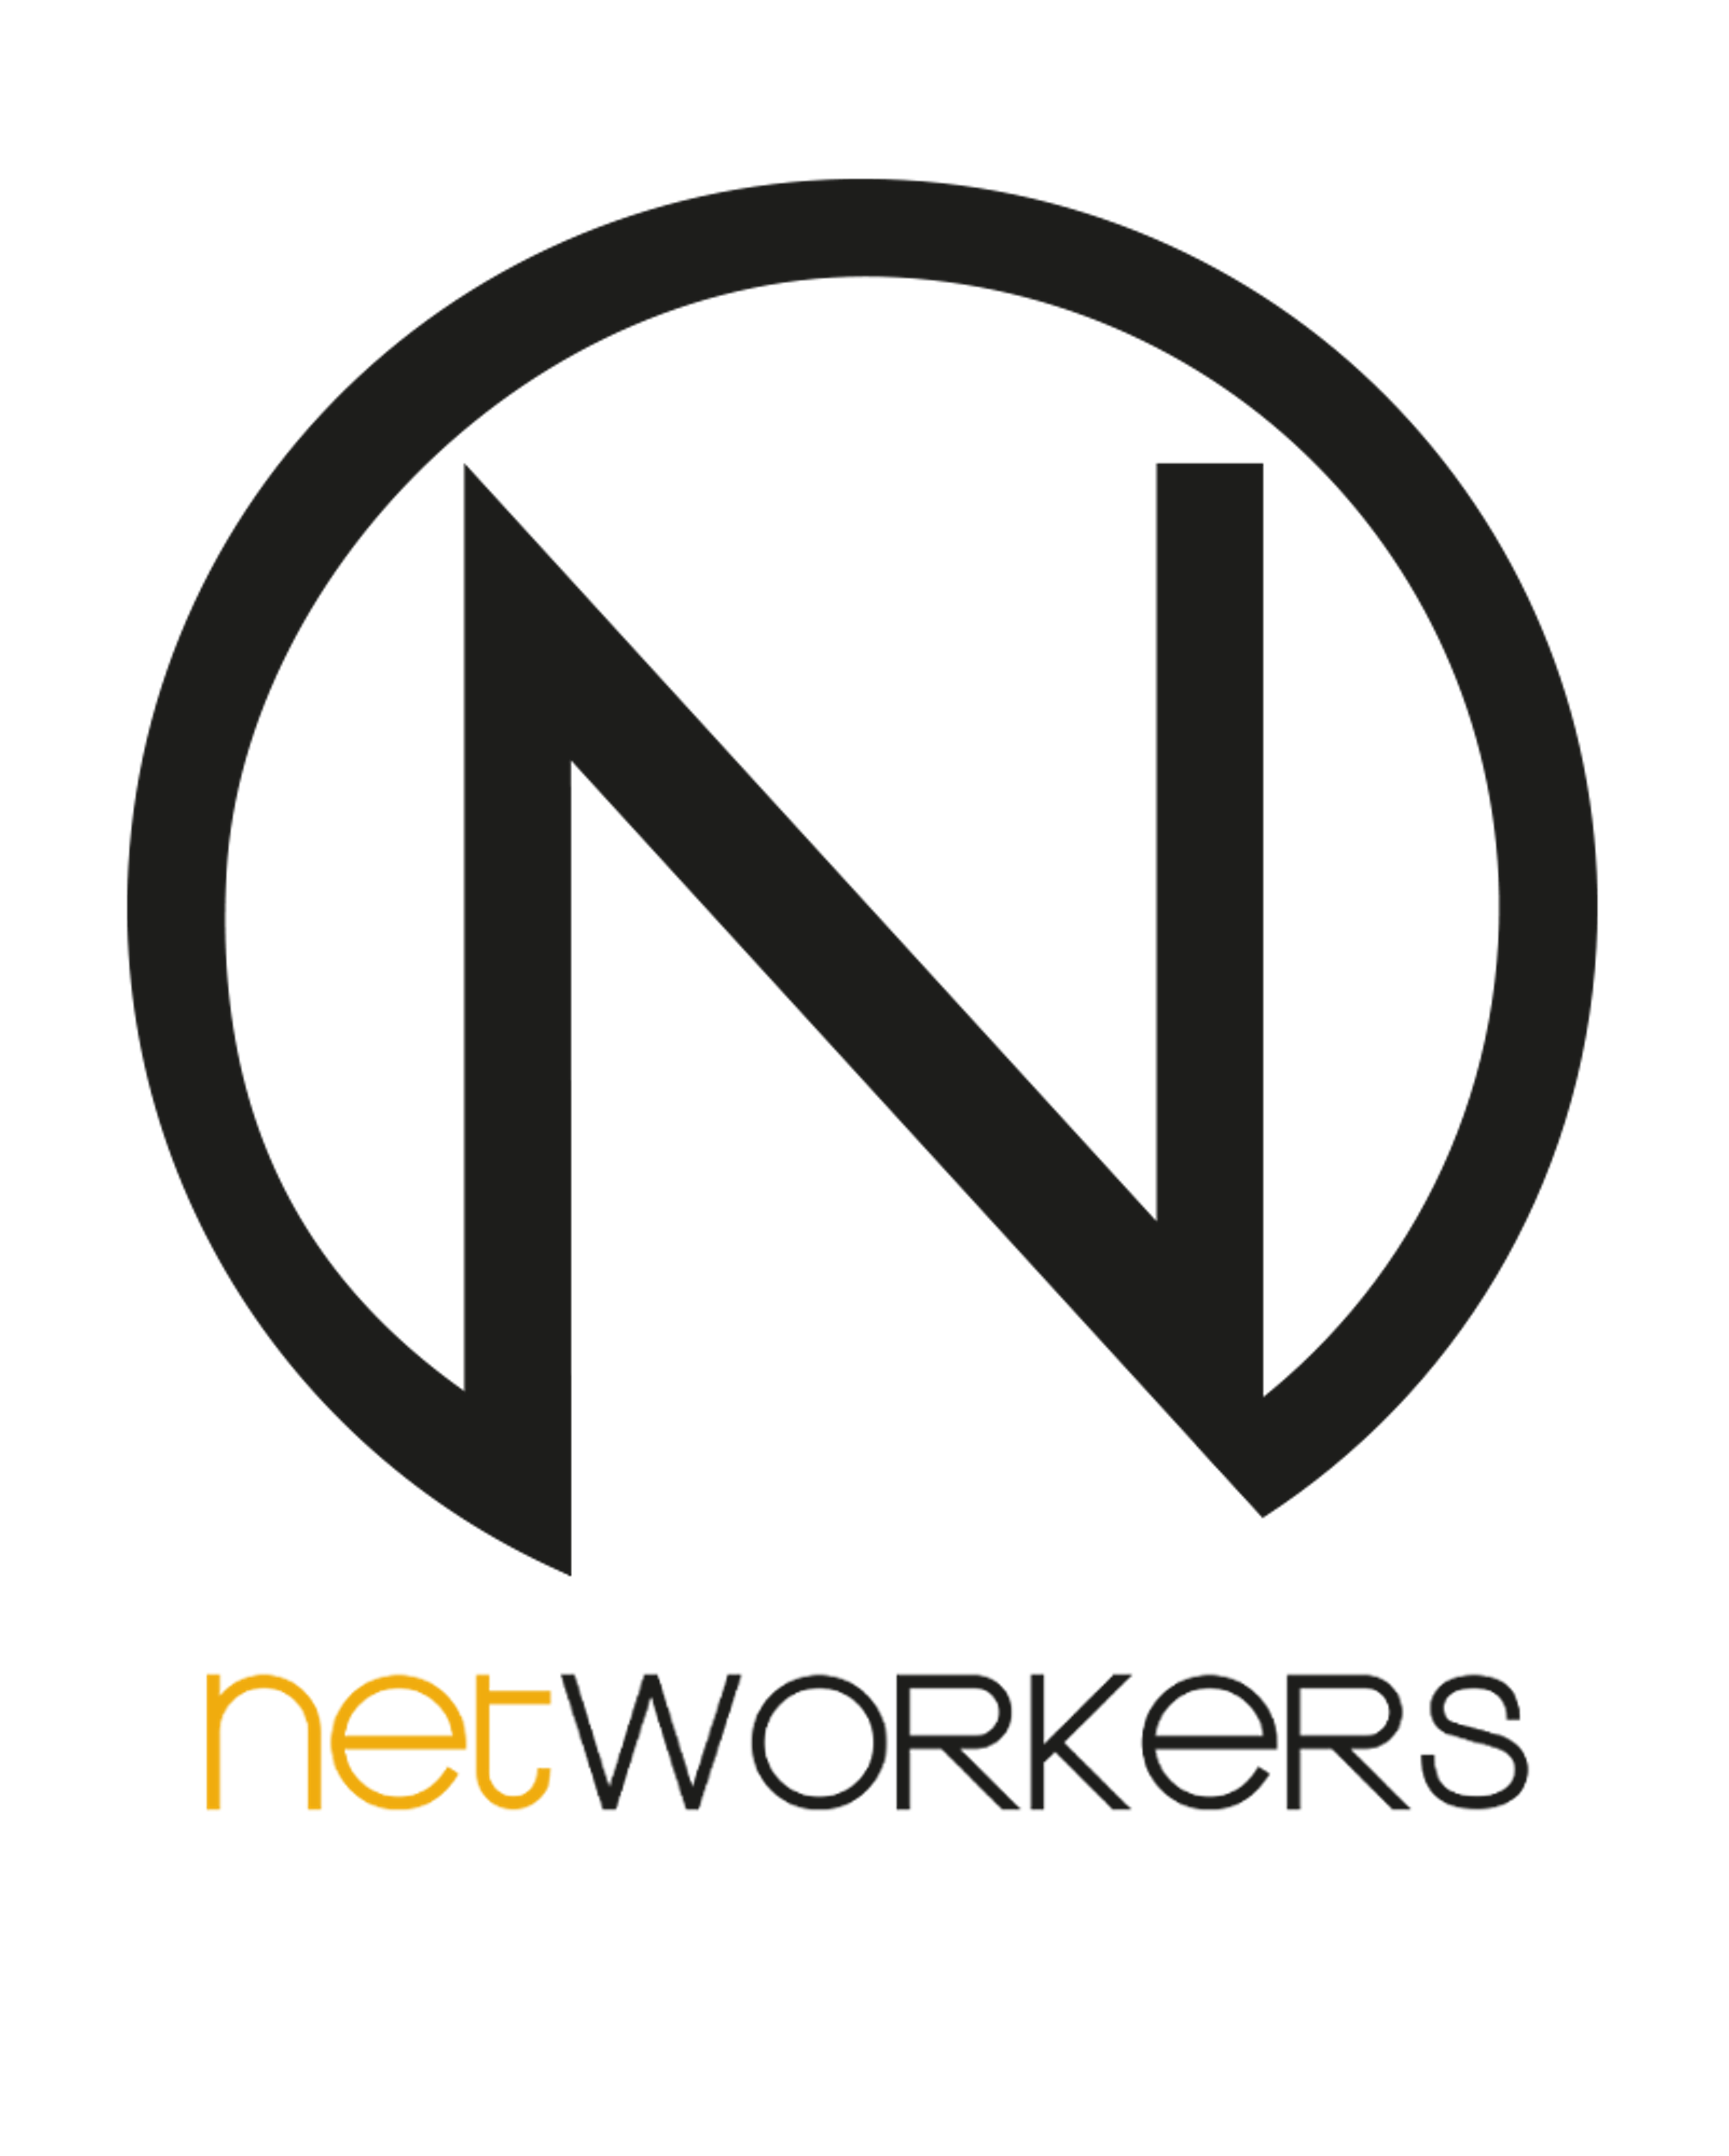 Networkers.pl